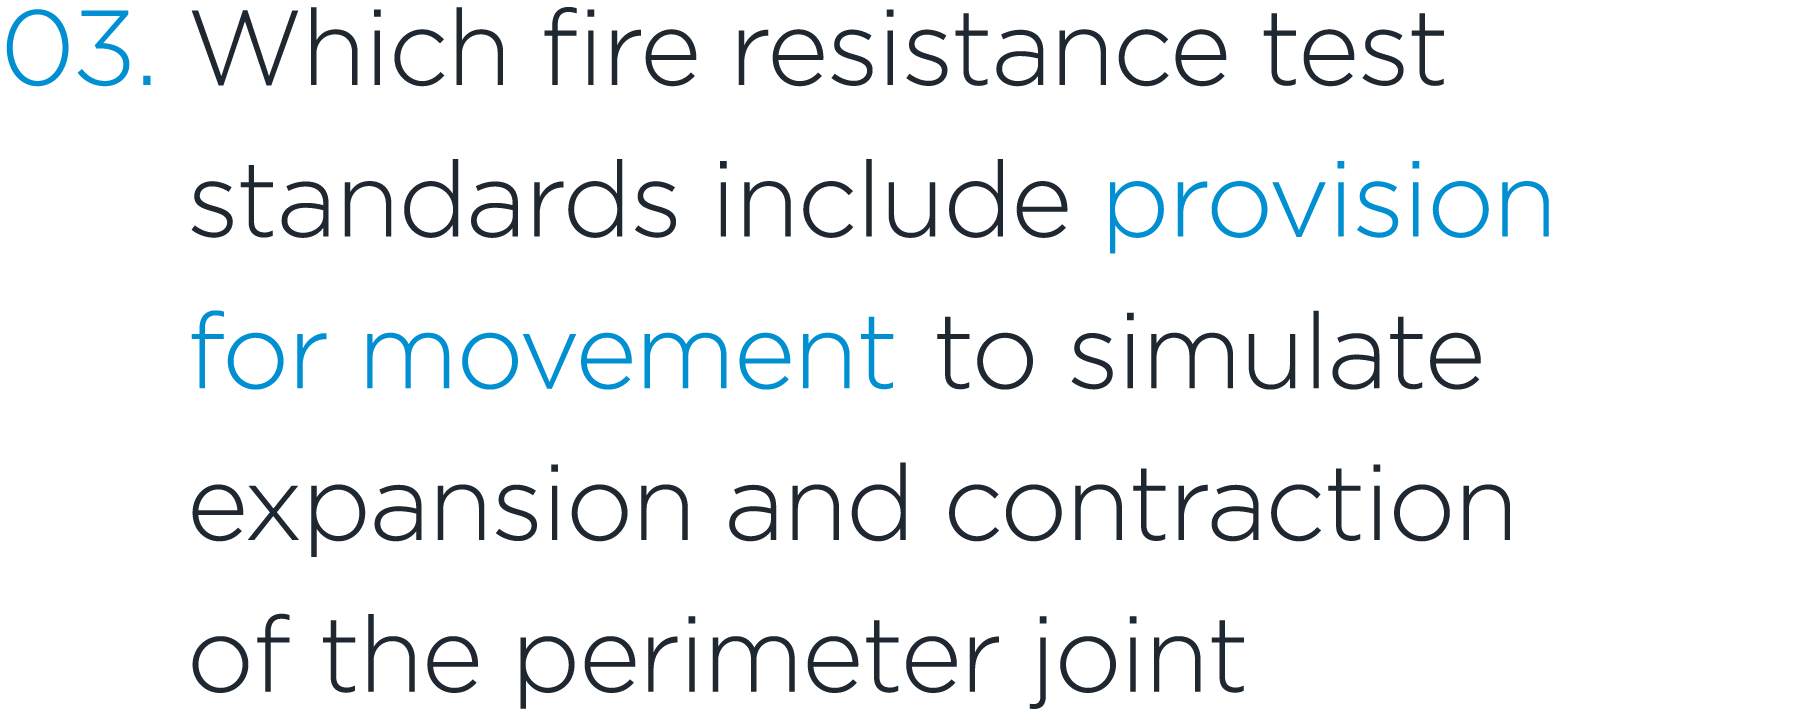 03. Which fire resistance test standards include provision for movement to simulate expansion and contraction of the ...